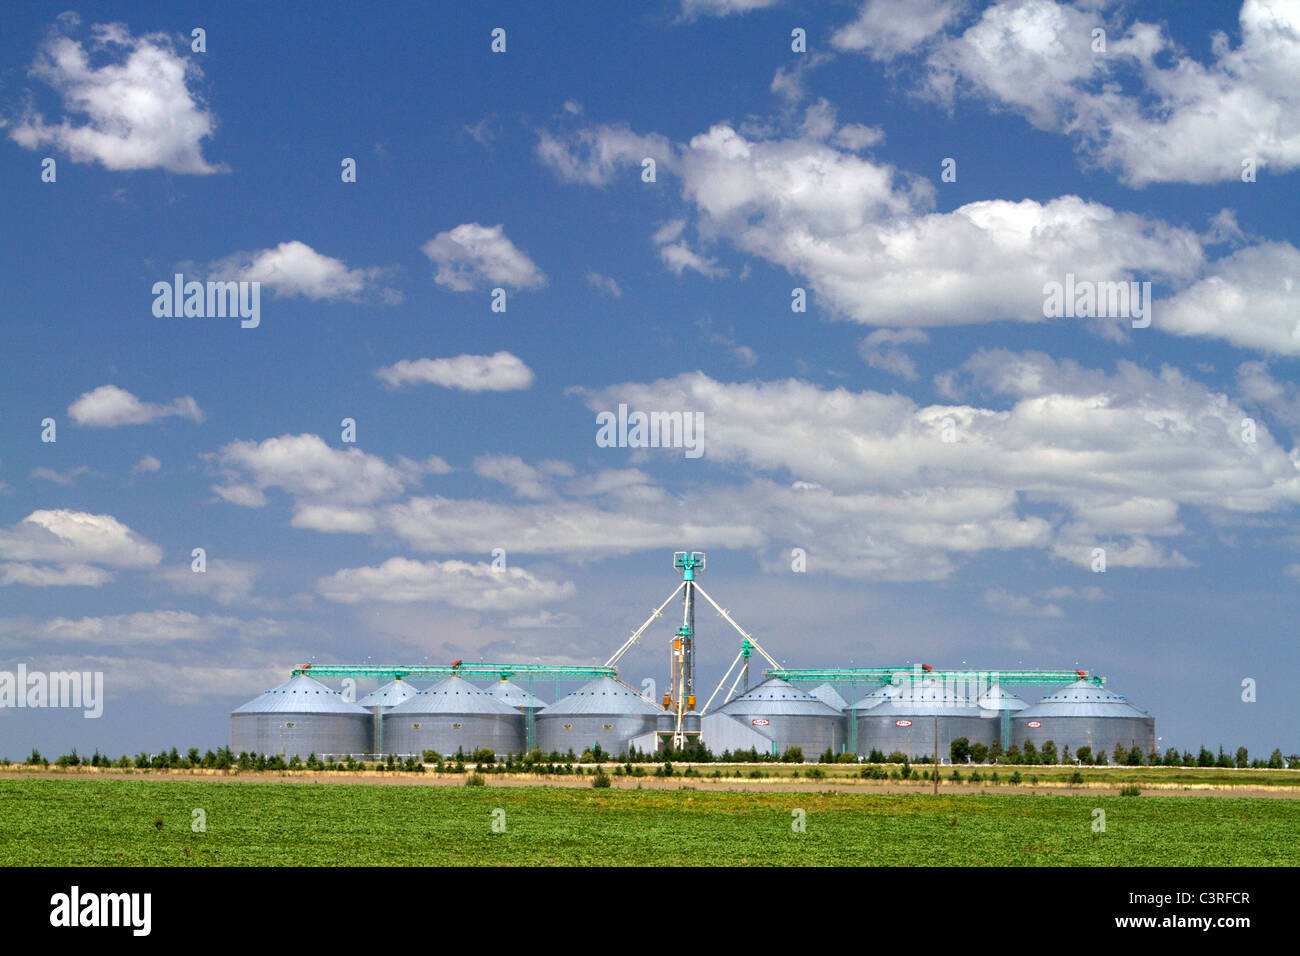 Grain silo's and farmland on the pampas of Argentina. Stock Photo